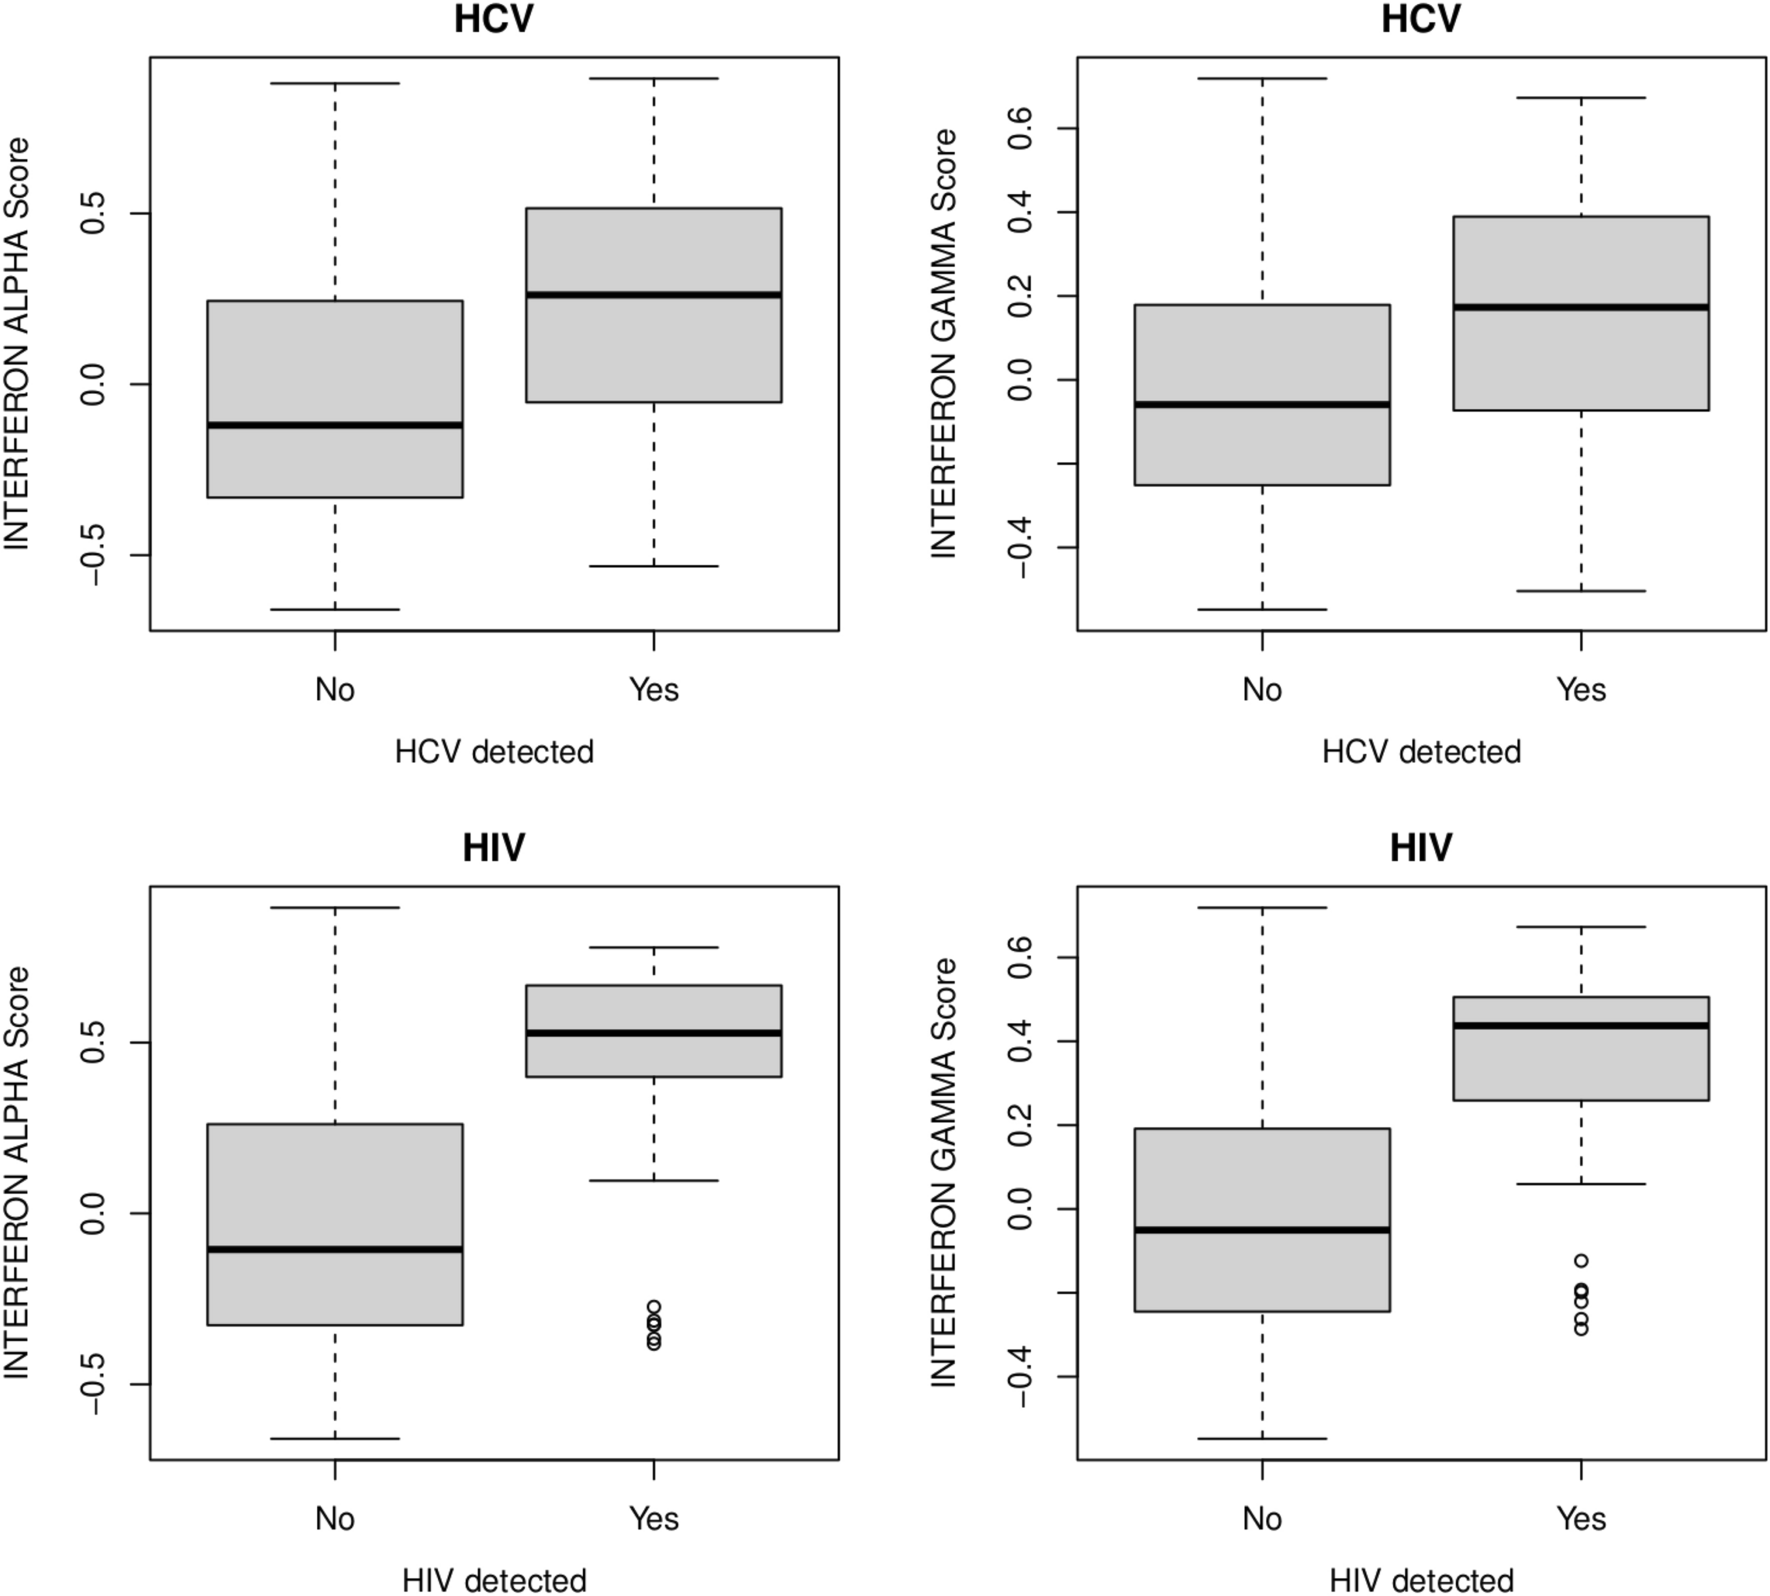 Hepatitis C and HIV detection by blood RNA-sequencing cohort of smokers |